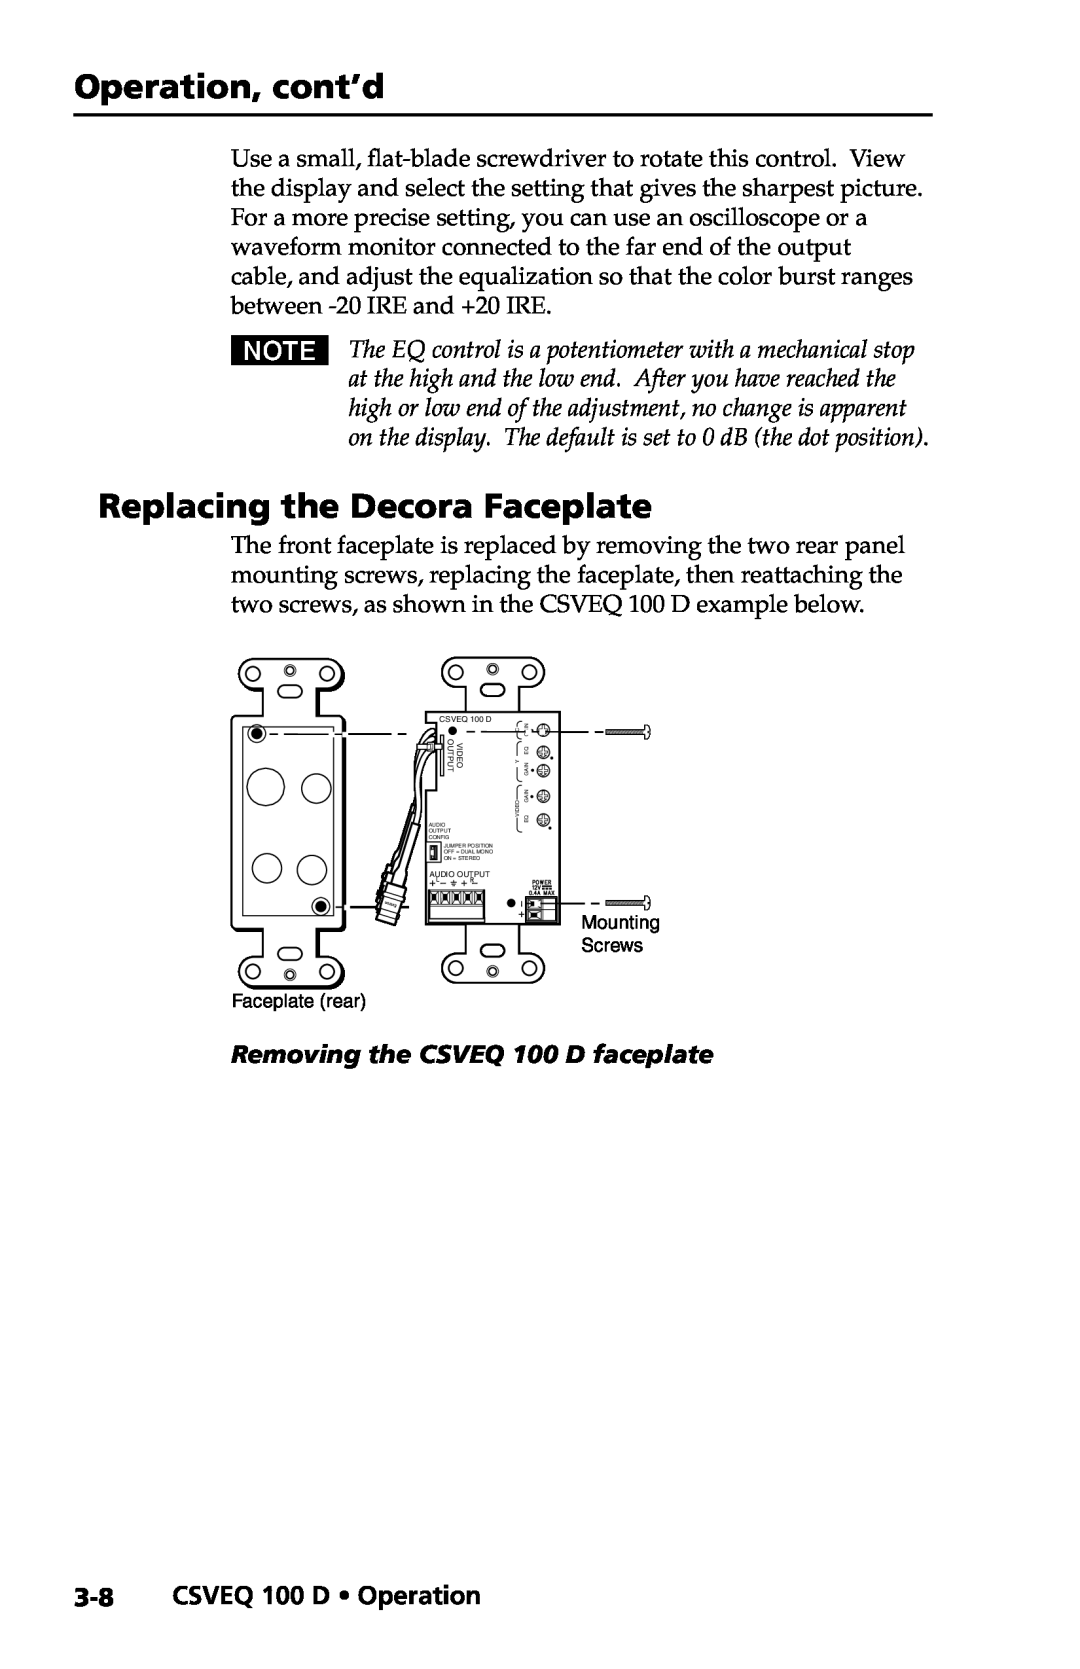 Extron electronic user manual Replacing the Decora Faceplate, CSVEQ 100 D Operation, Removing the CSVEQ 100 D faceplate 